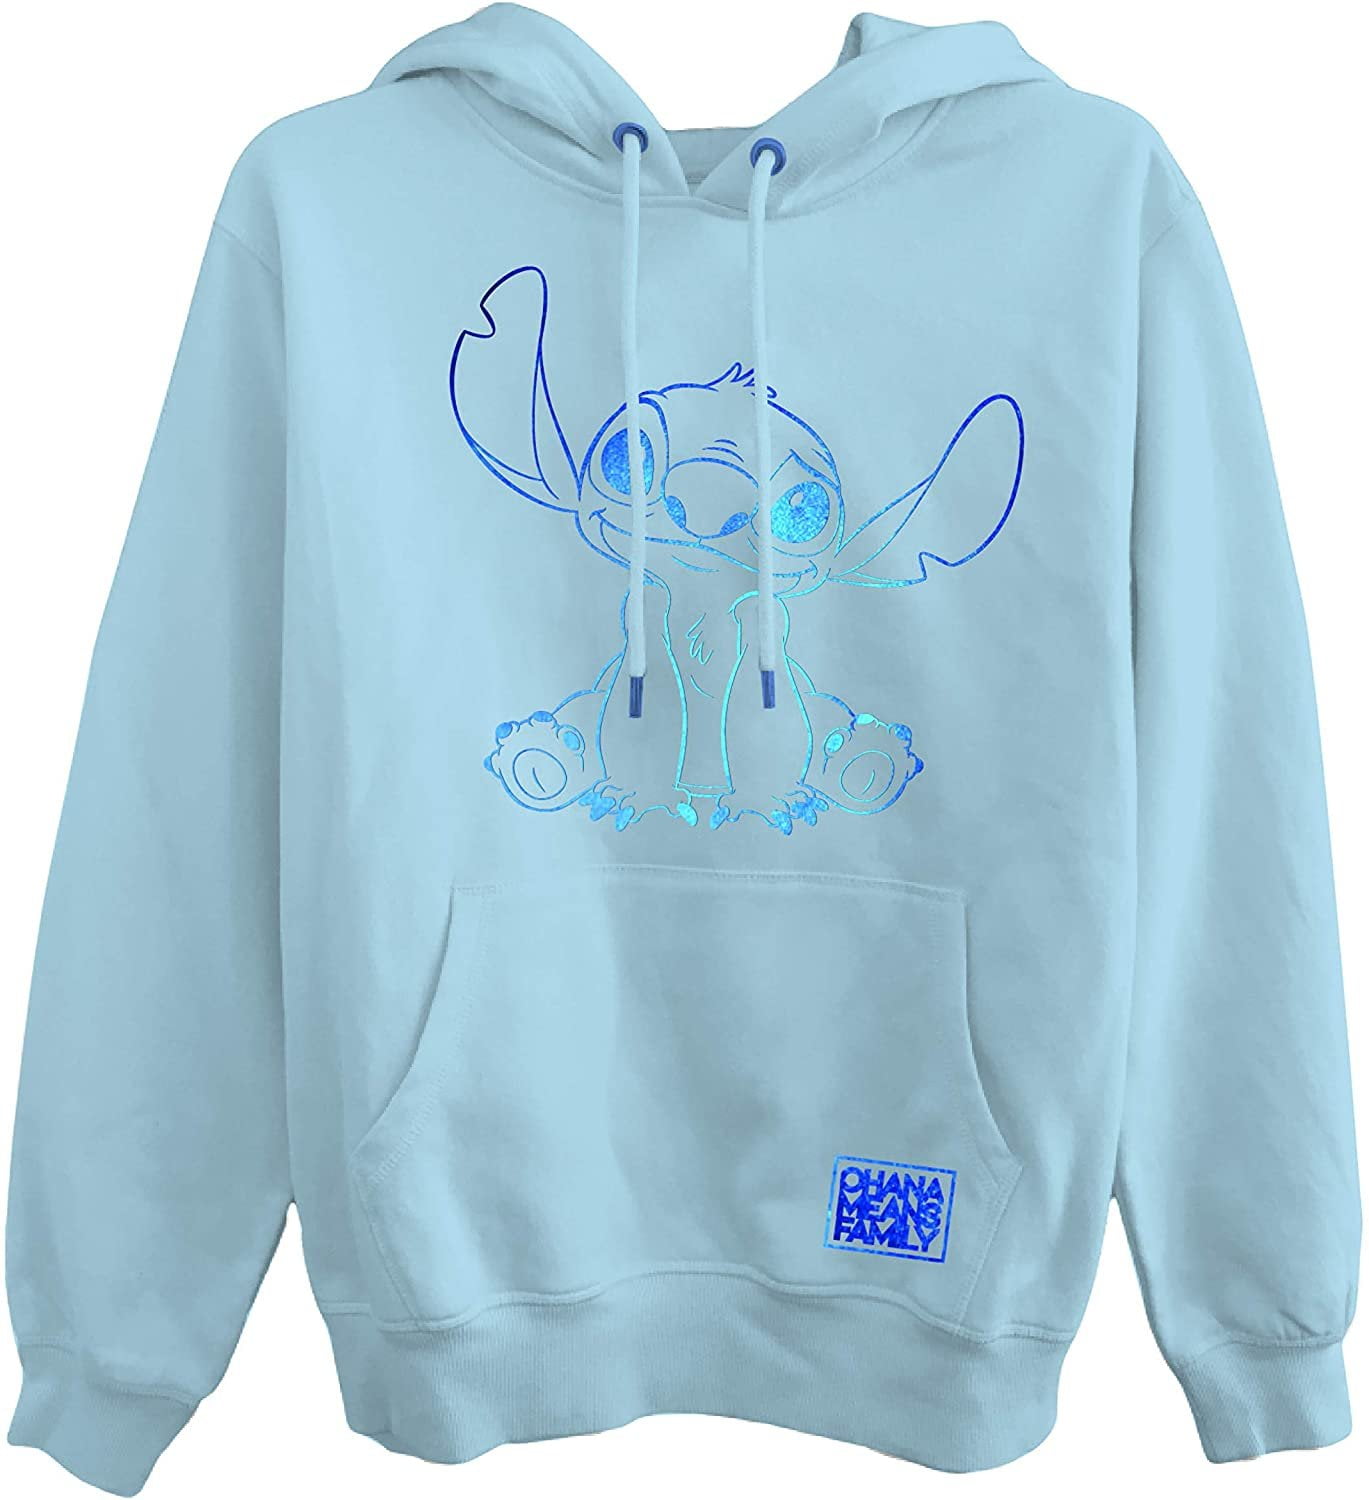  Prime Clearance Items Today Under 5 Dollars New Years  Sweatshirt 2t Blue : Clothing, Shoes & Jewelry